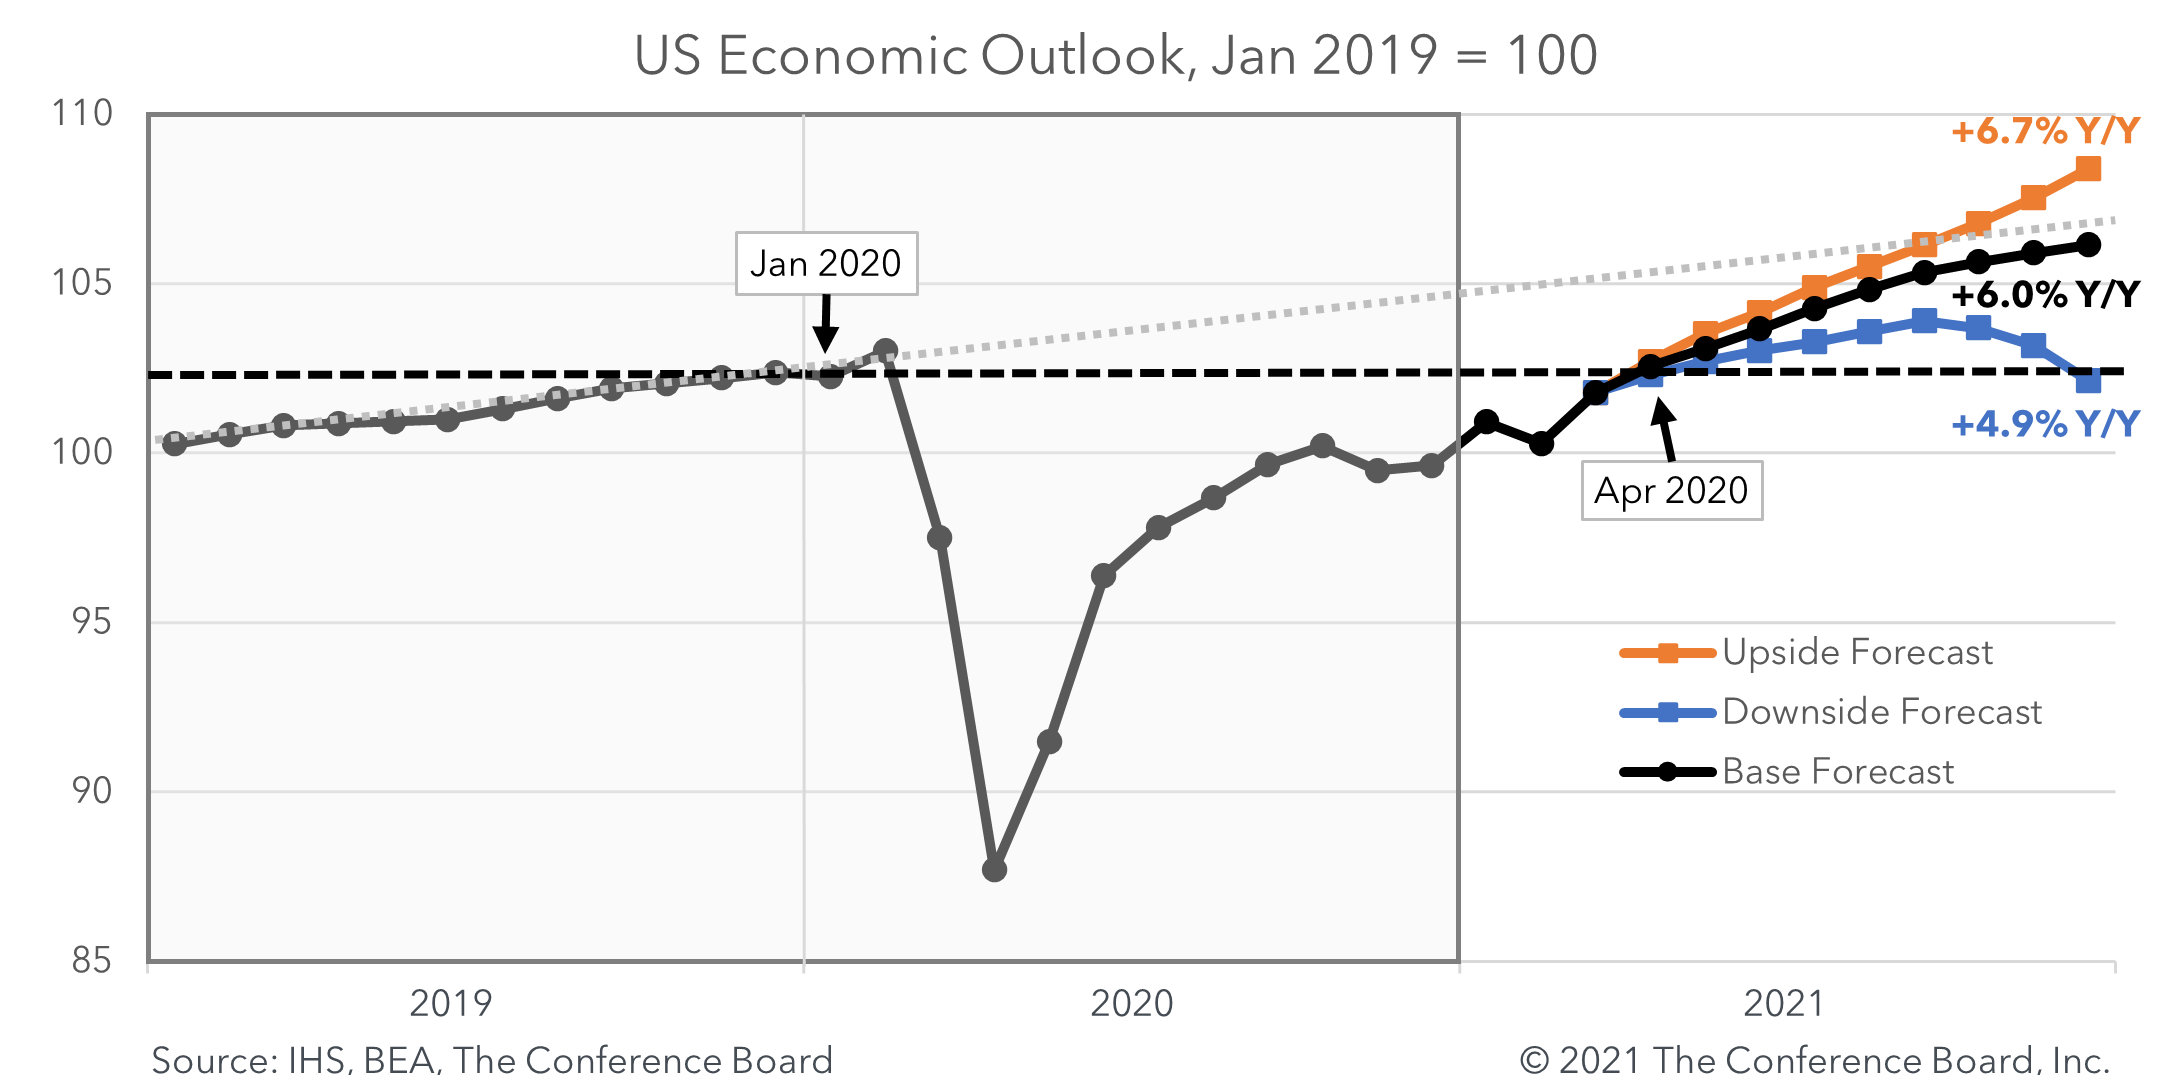 US Economic Outlook Gets Another Upgrade